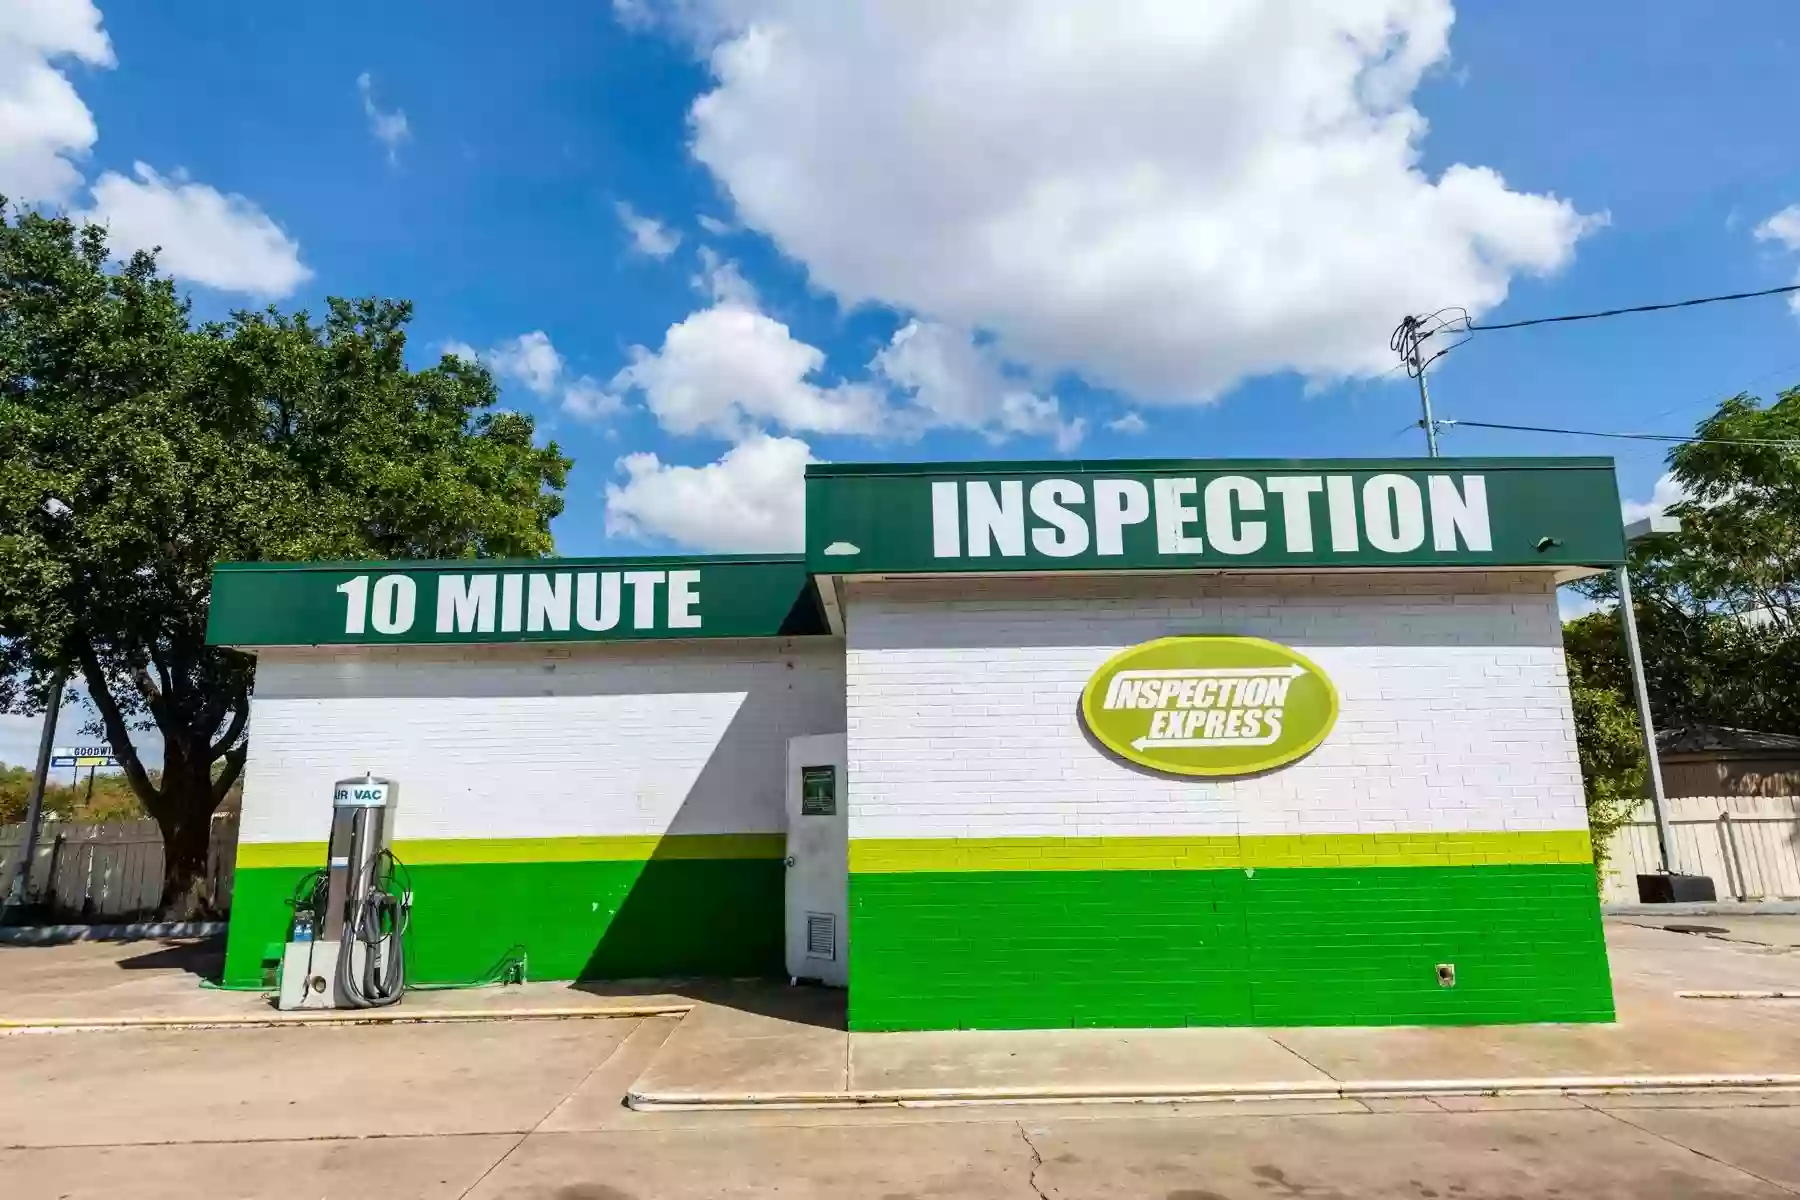 Inspection Express - 10 Minute Inspection